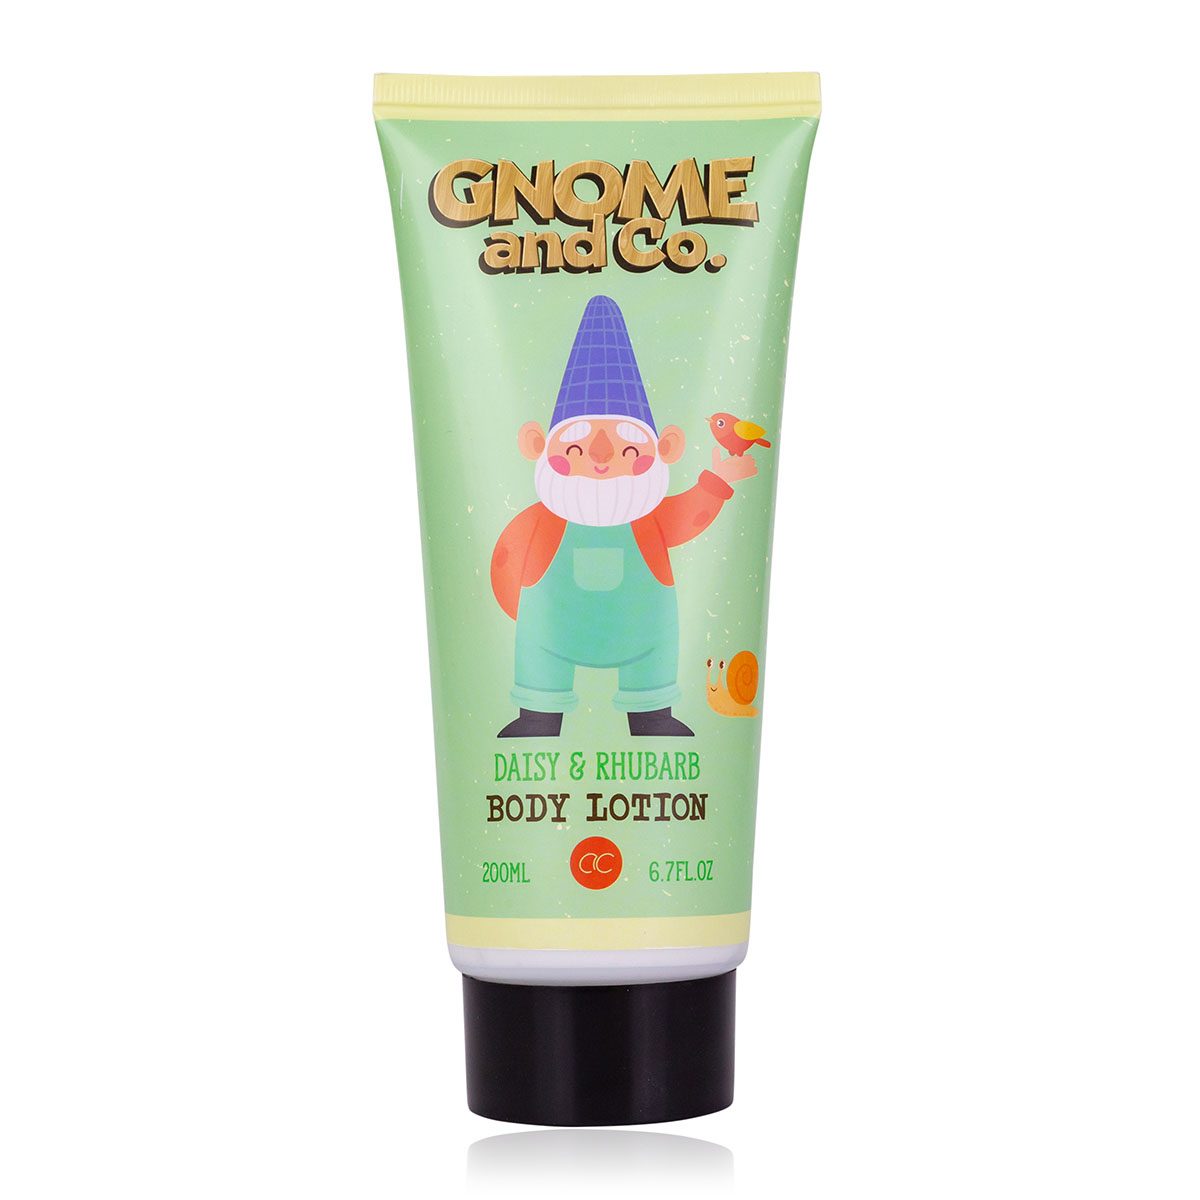 Body Lotion, Gnome and co.